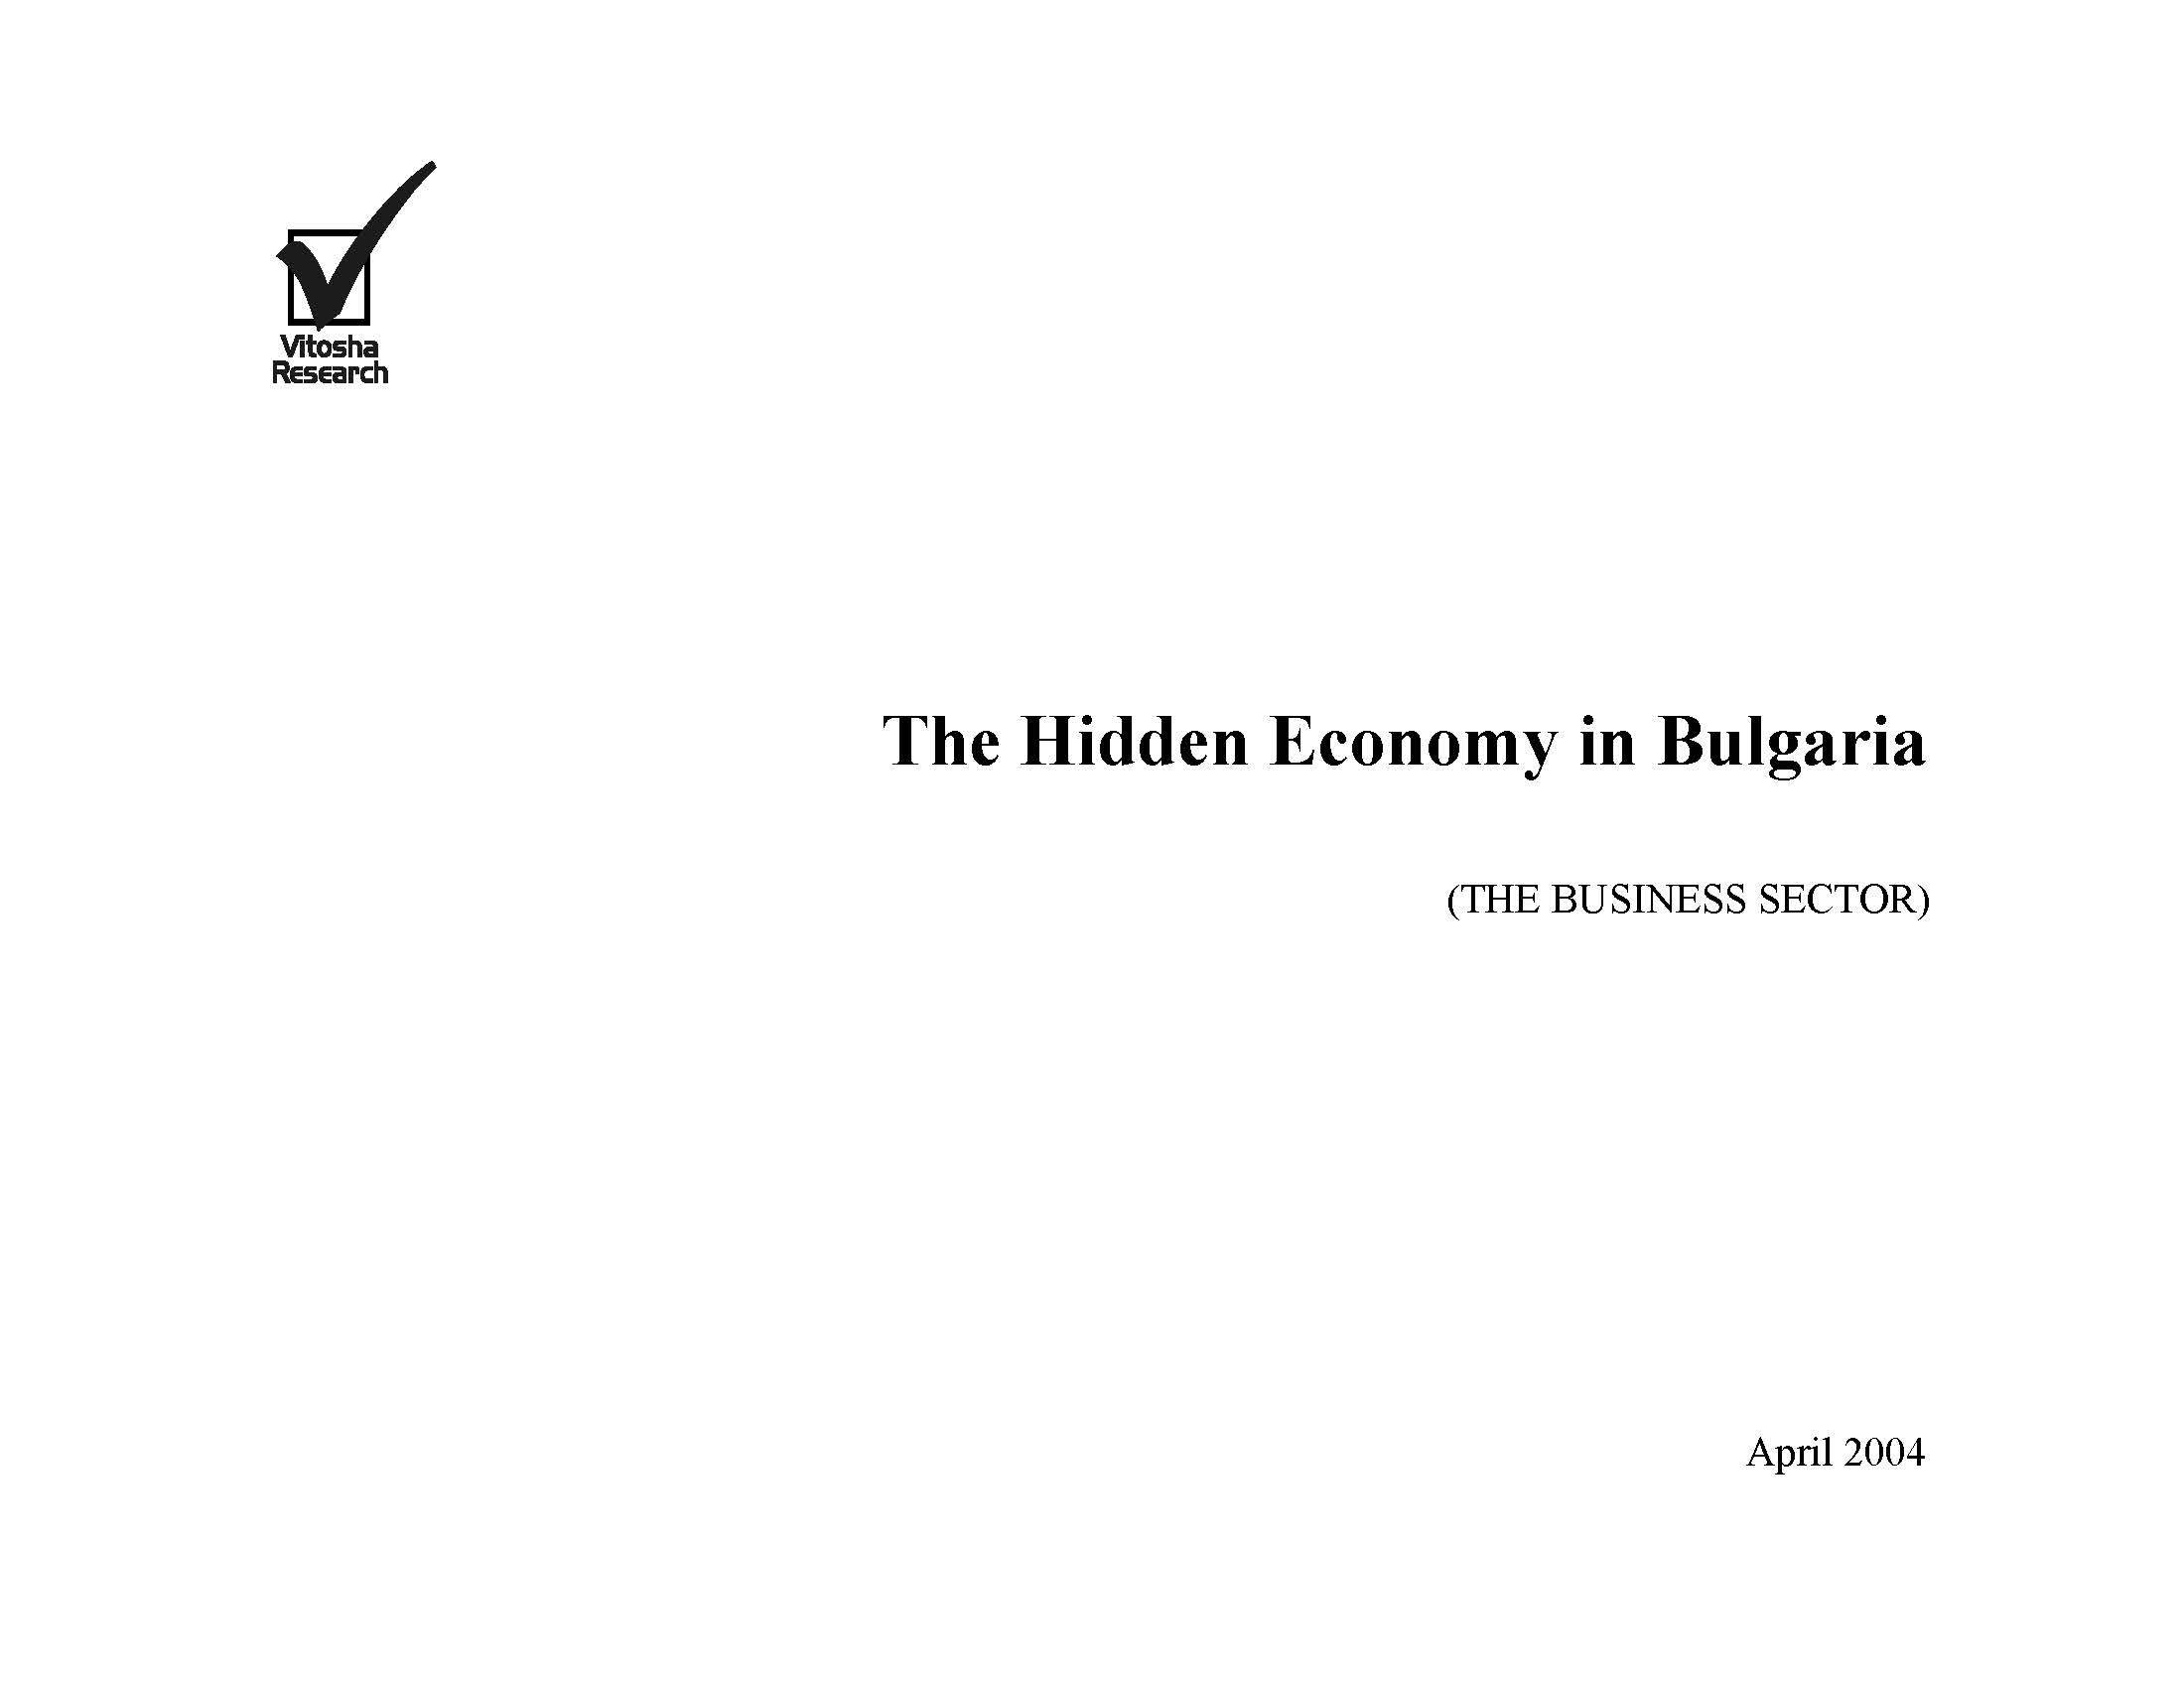 The Hidden Economy in Bulgaria (Business sector survey), April 2004